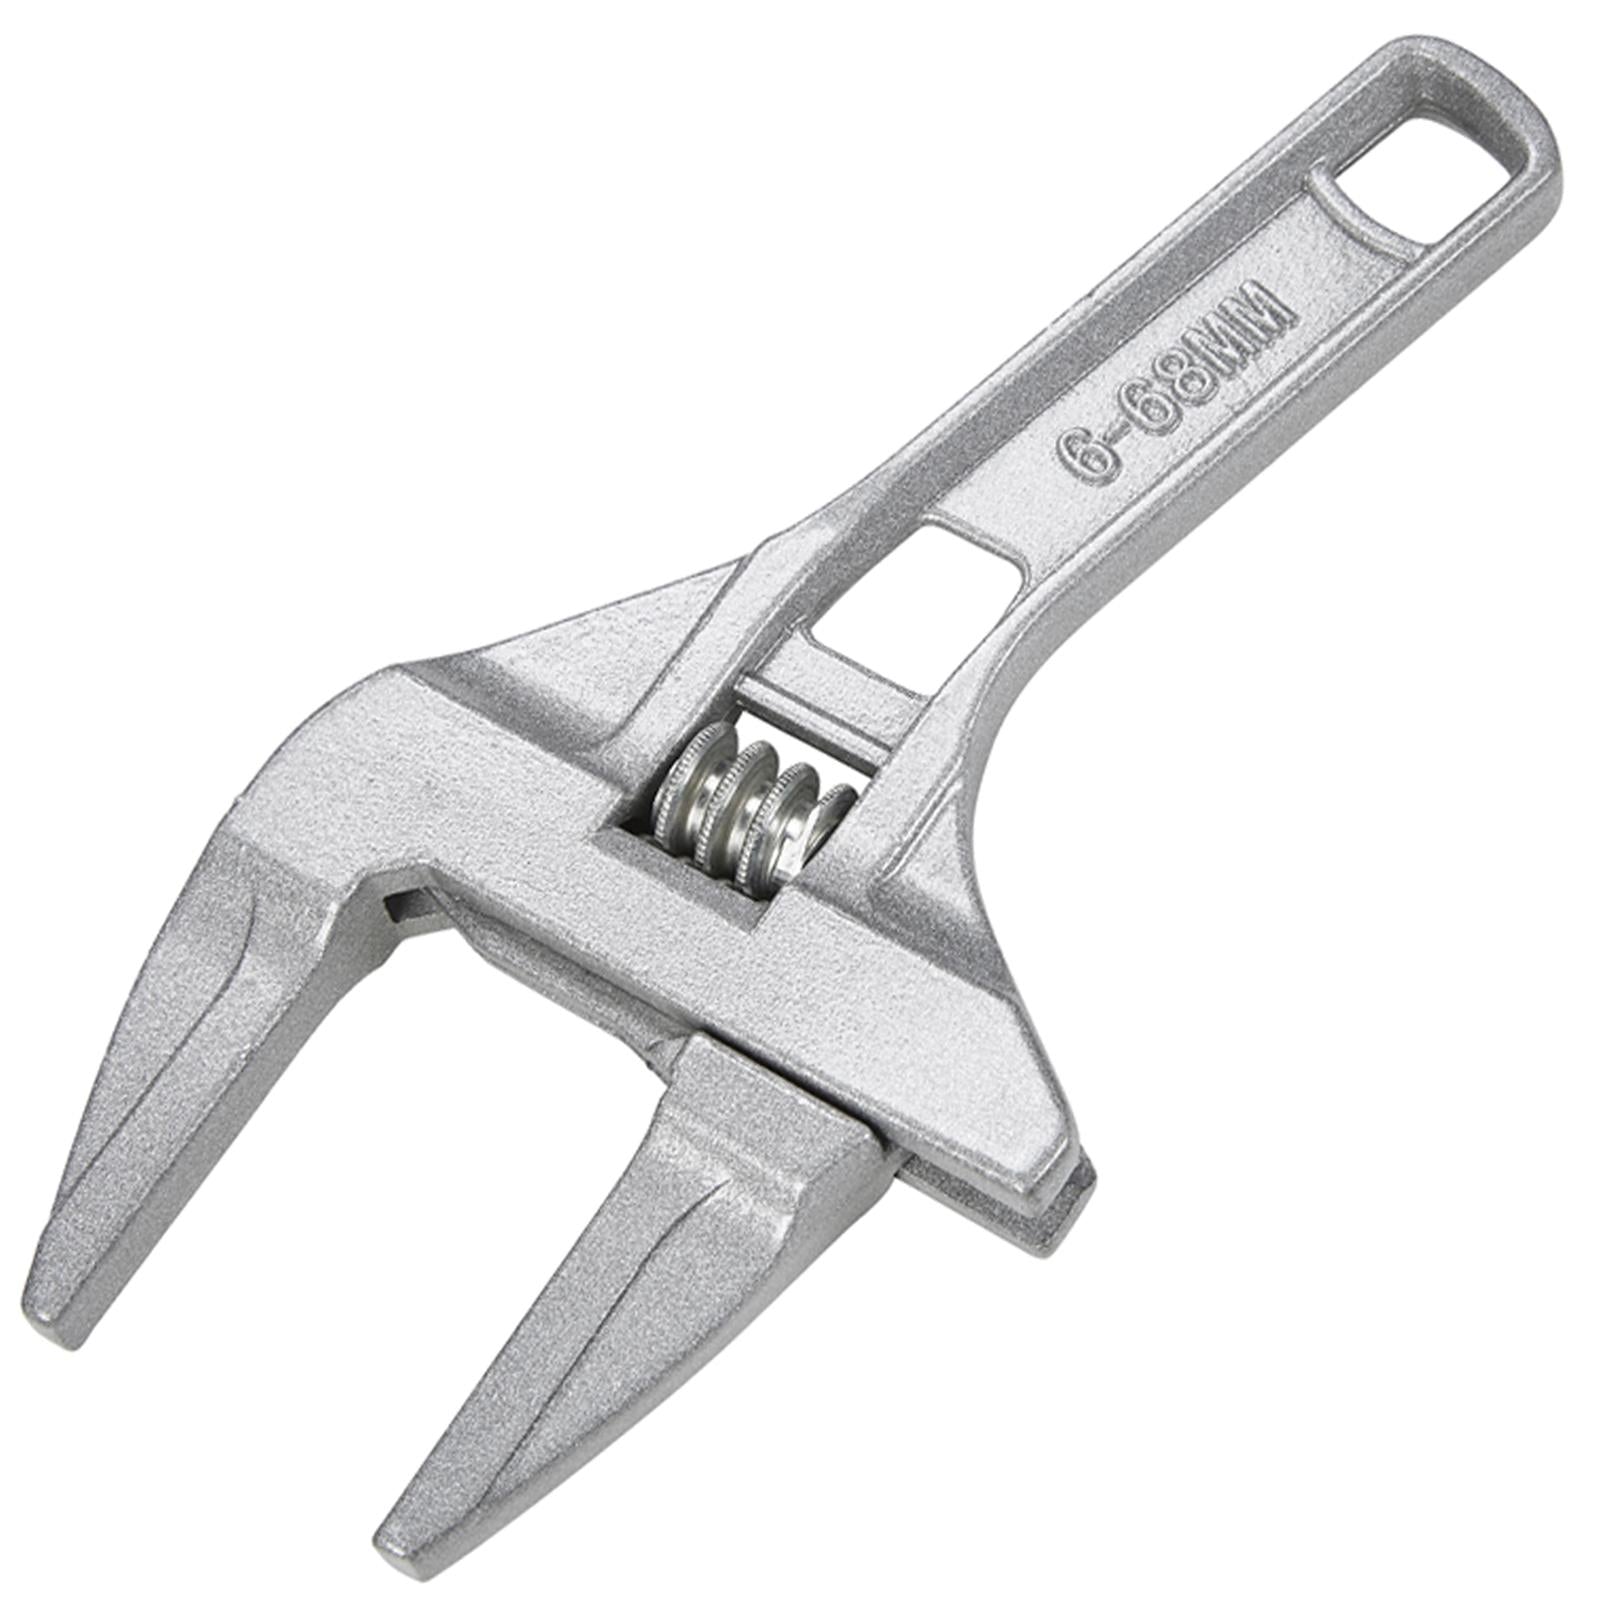 BlueSpot Adjustable Wrench Extra Wide 200mm 8in Jaw Width 68mm